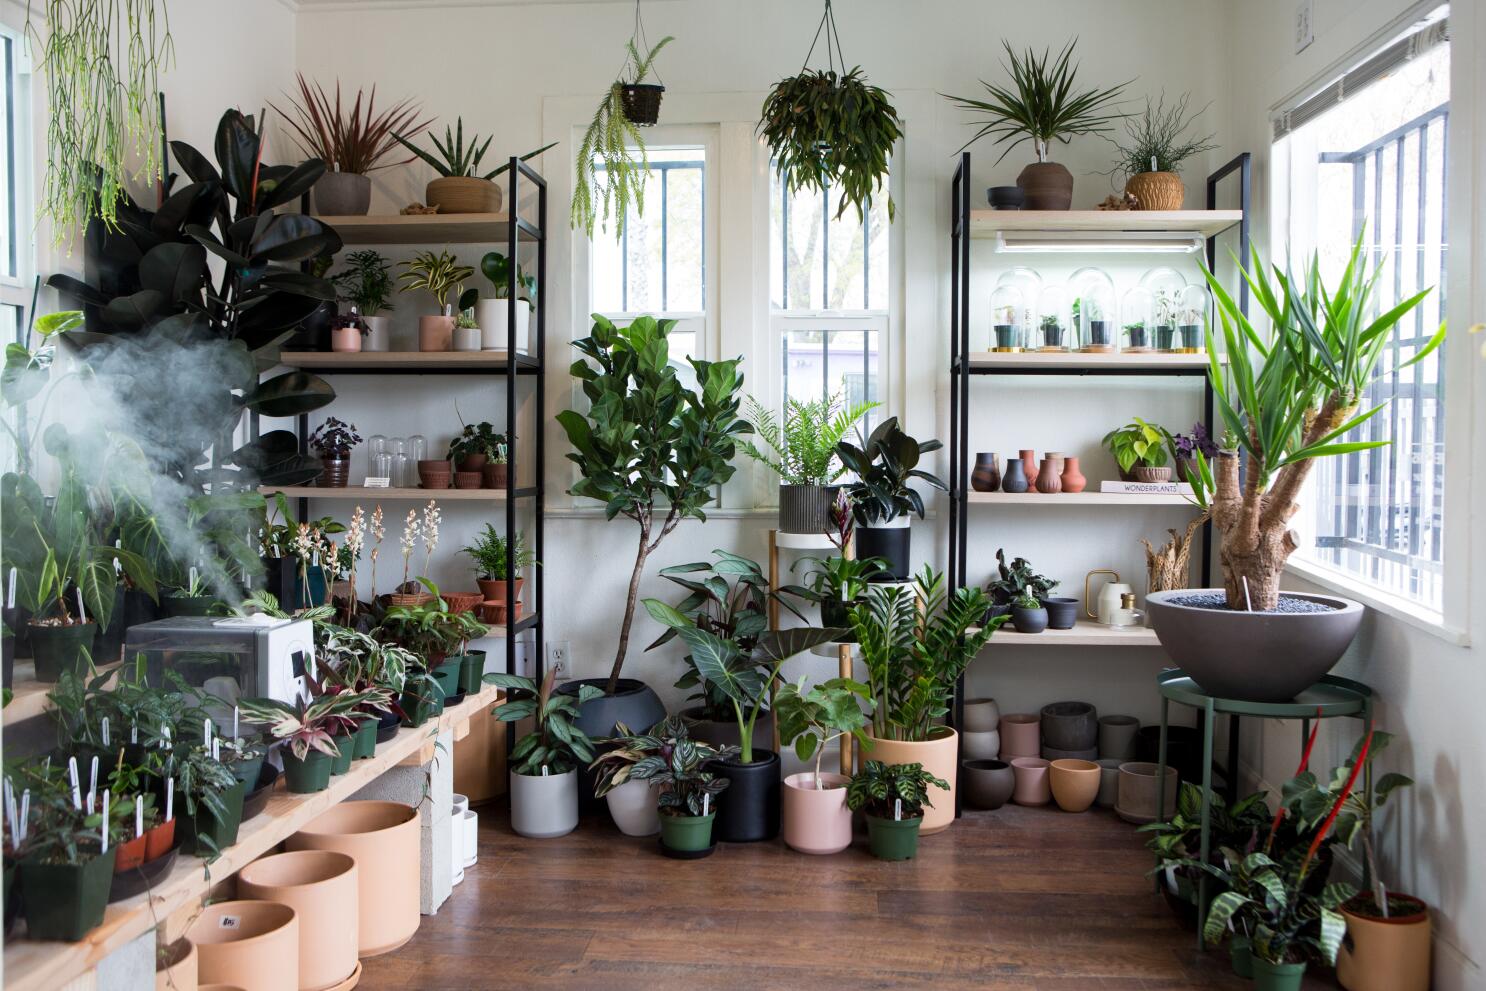 How to care for houseplants during high temperatures - Los Angeles ...